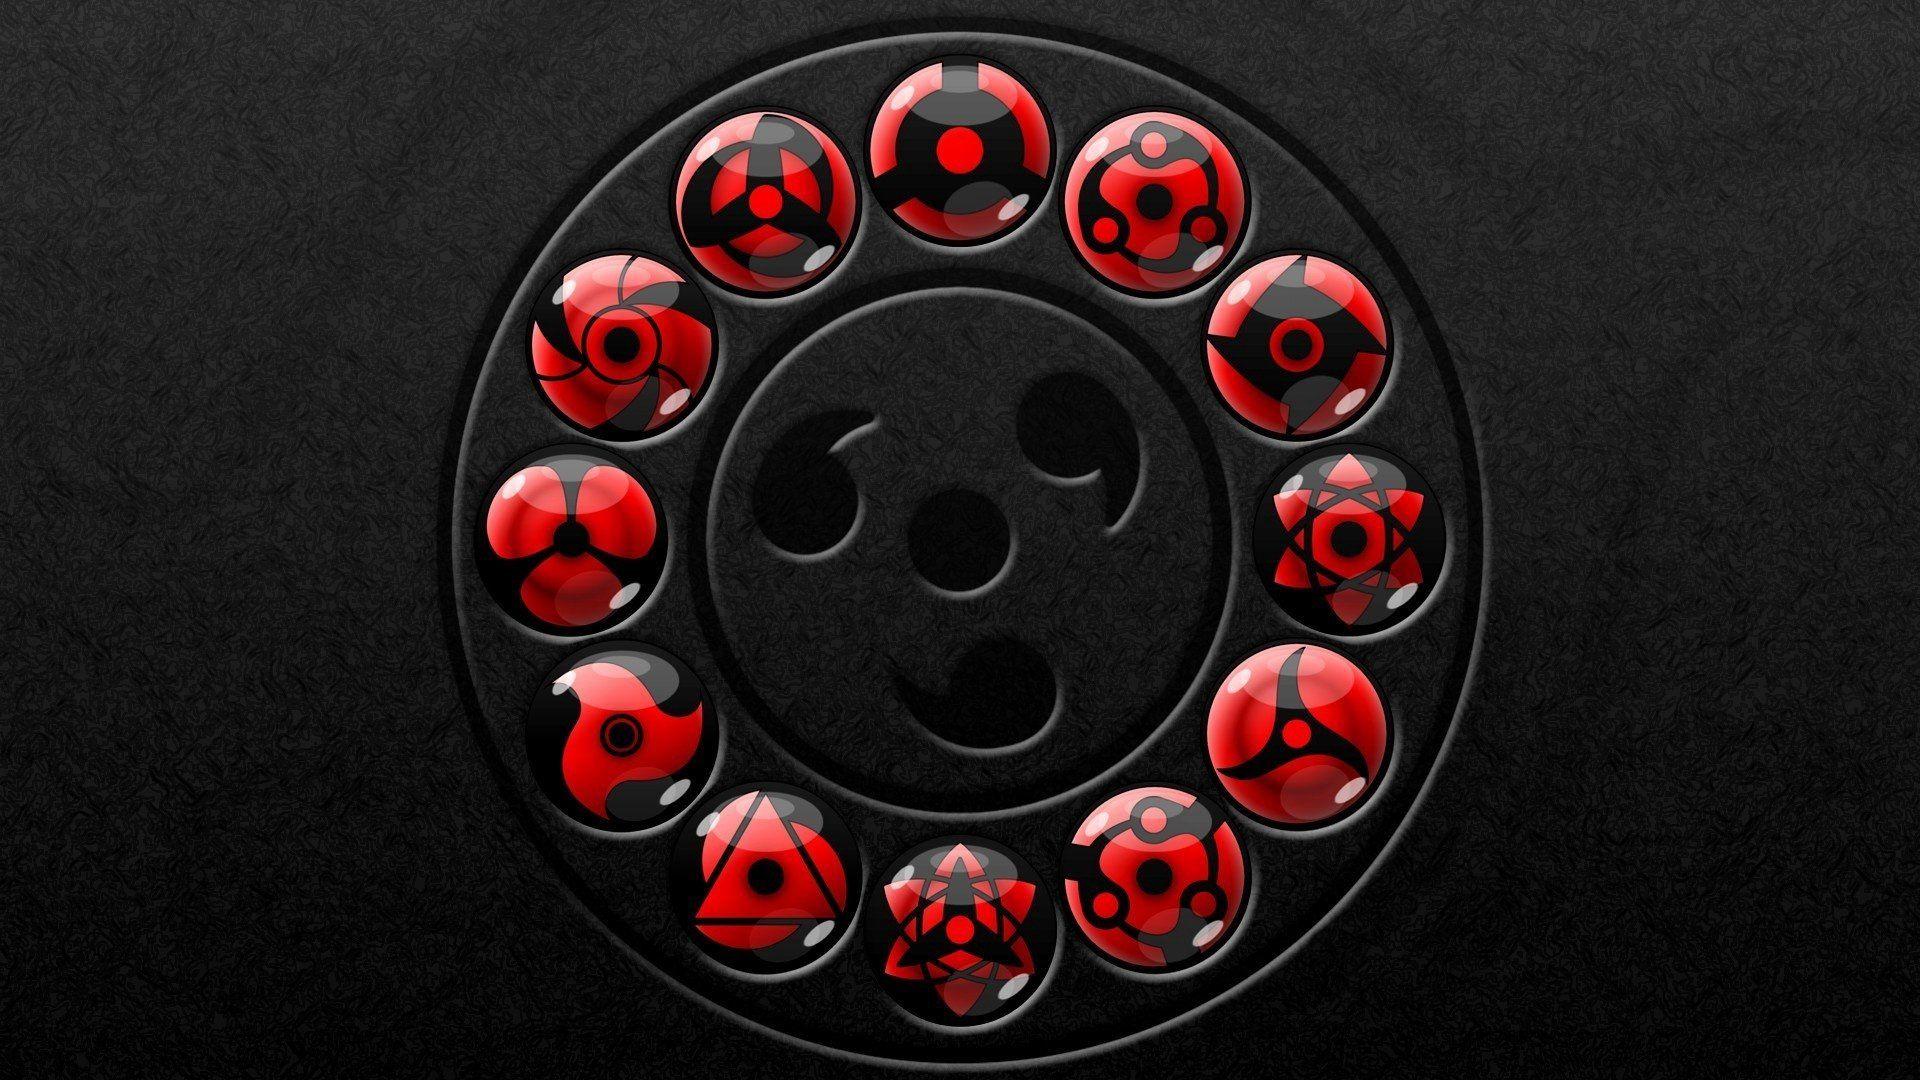 The Best 8 Naruto Sharingan And Rinnegan Wallpaper Commercialtrendq